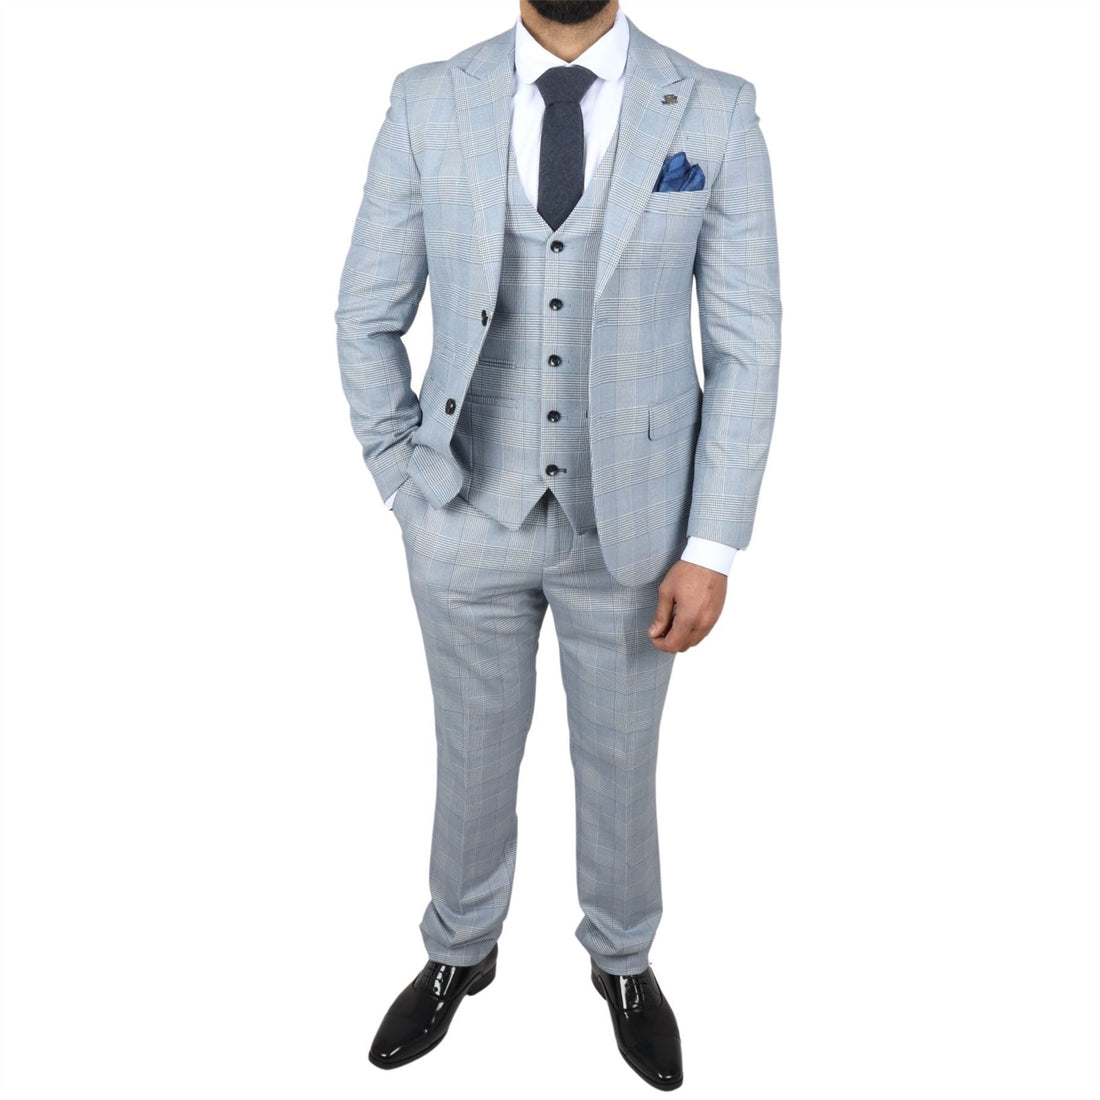 Men's Suit Blue 3 Piece Tweed Check Wedding Prom Tailored Fit